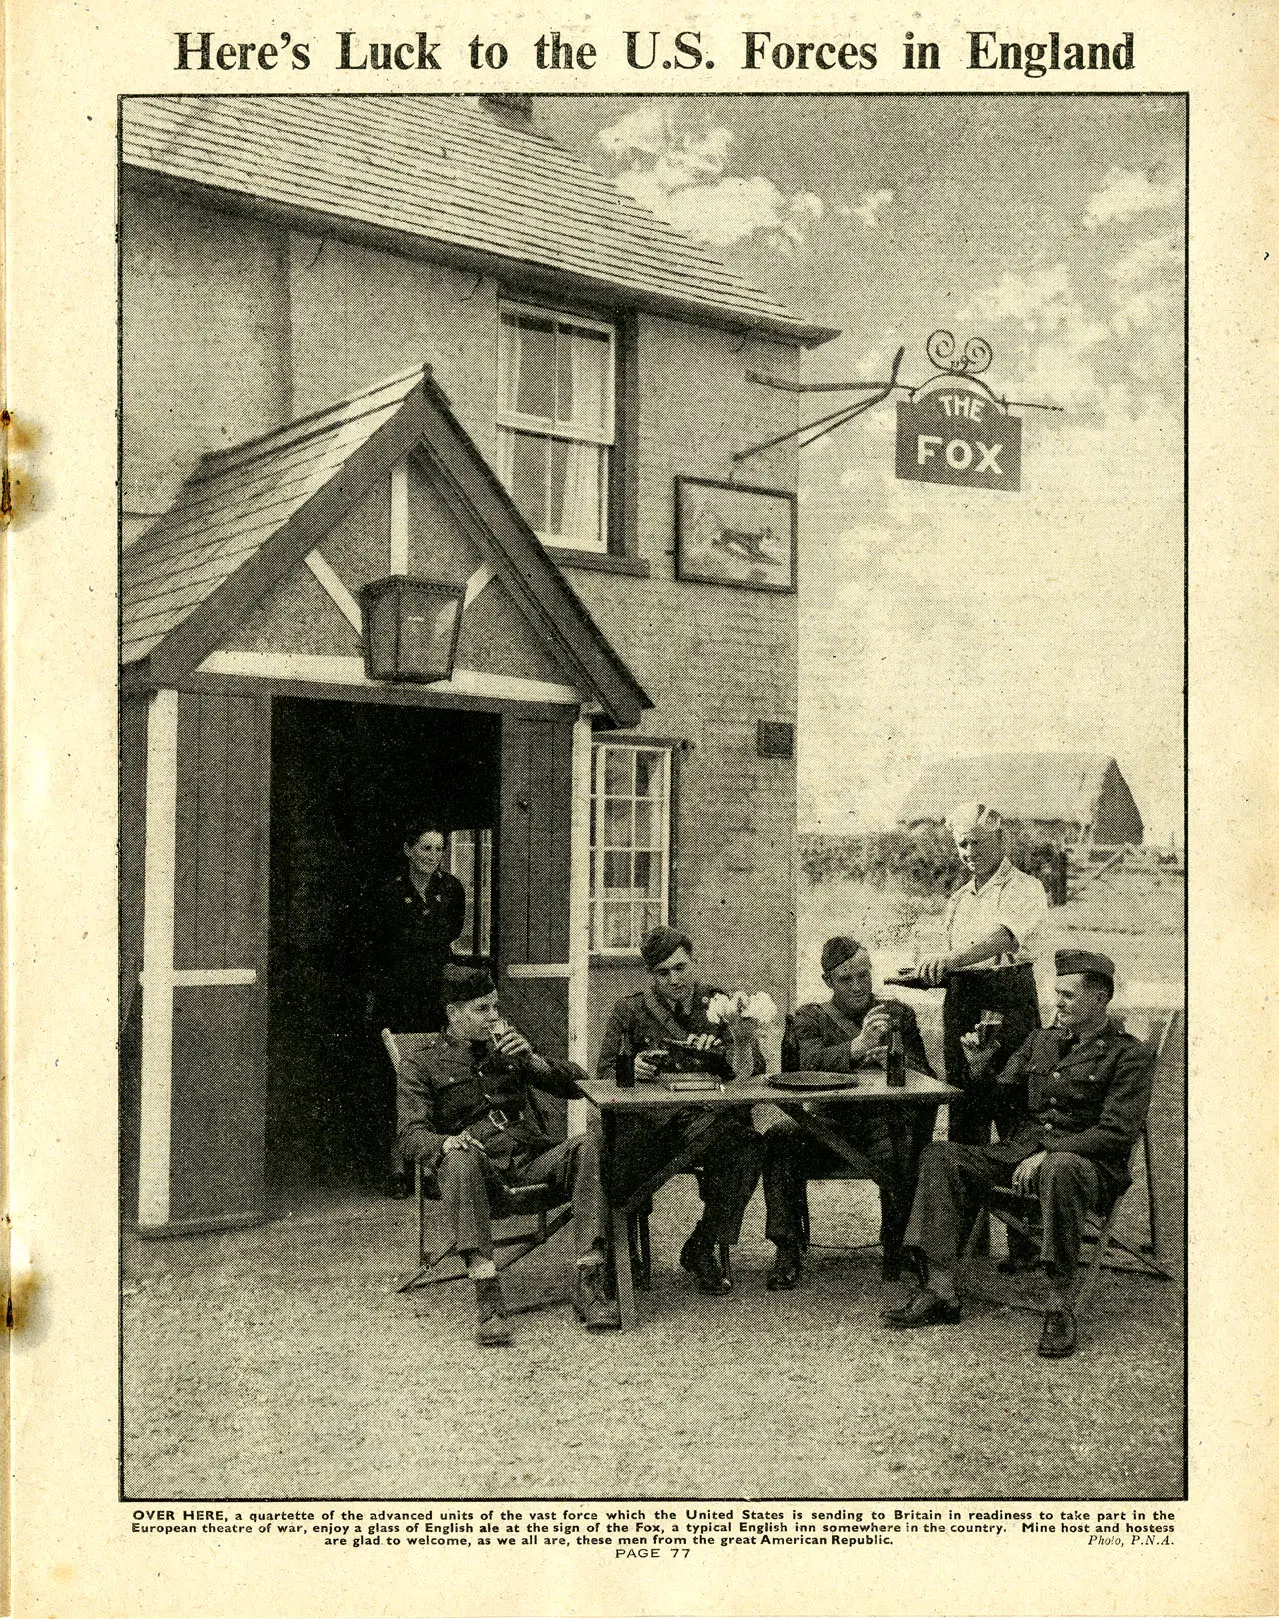 A page of "The War Illustrated" showing Four American soldiers in dress uniforms relaxing and drinking pints of beer outside a modest English inn, "The Fox", as their smiling English hosts look on. They are somewhere in the English countryside, with a thatch roof barn in the background.